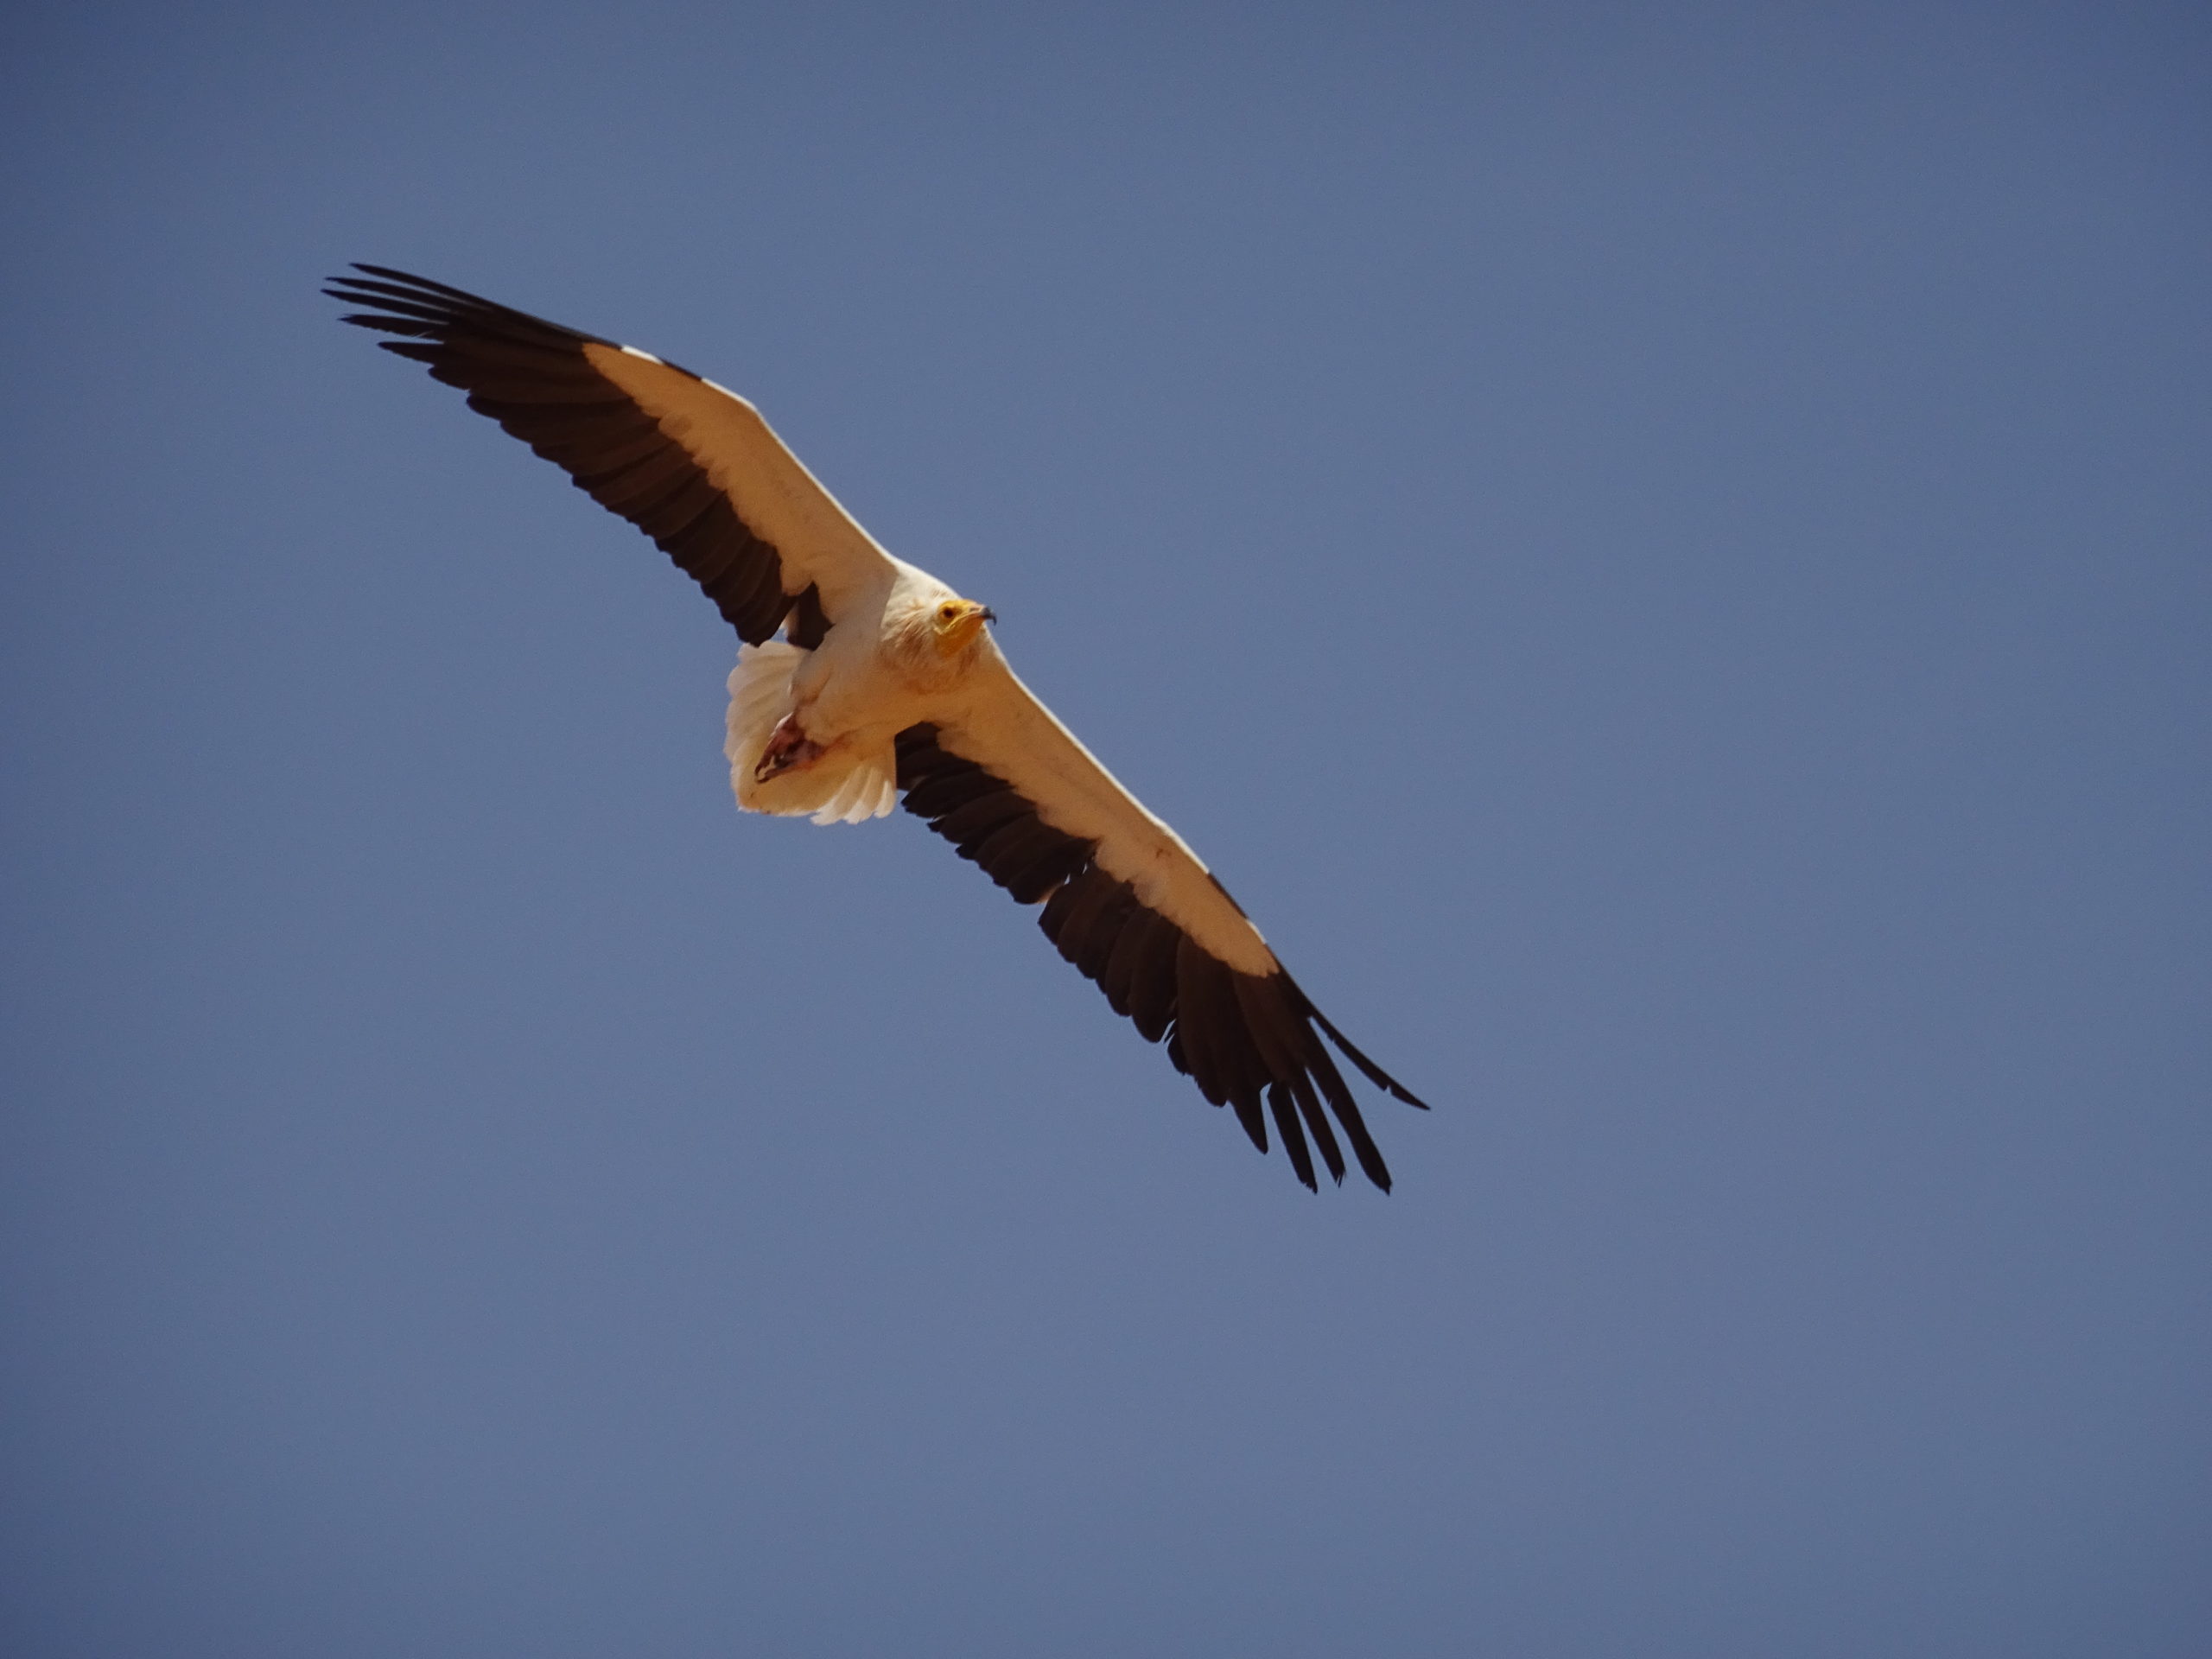 The Egyptian vulture and the White stork came back home